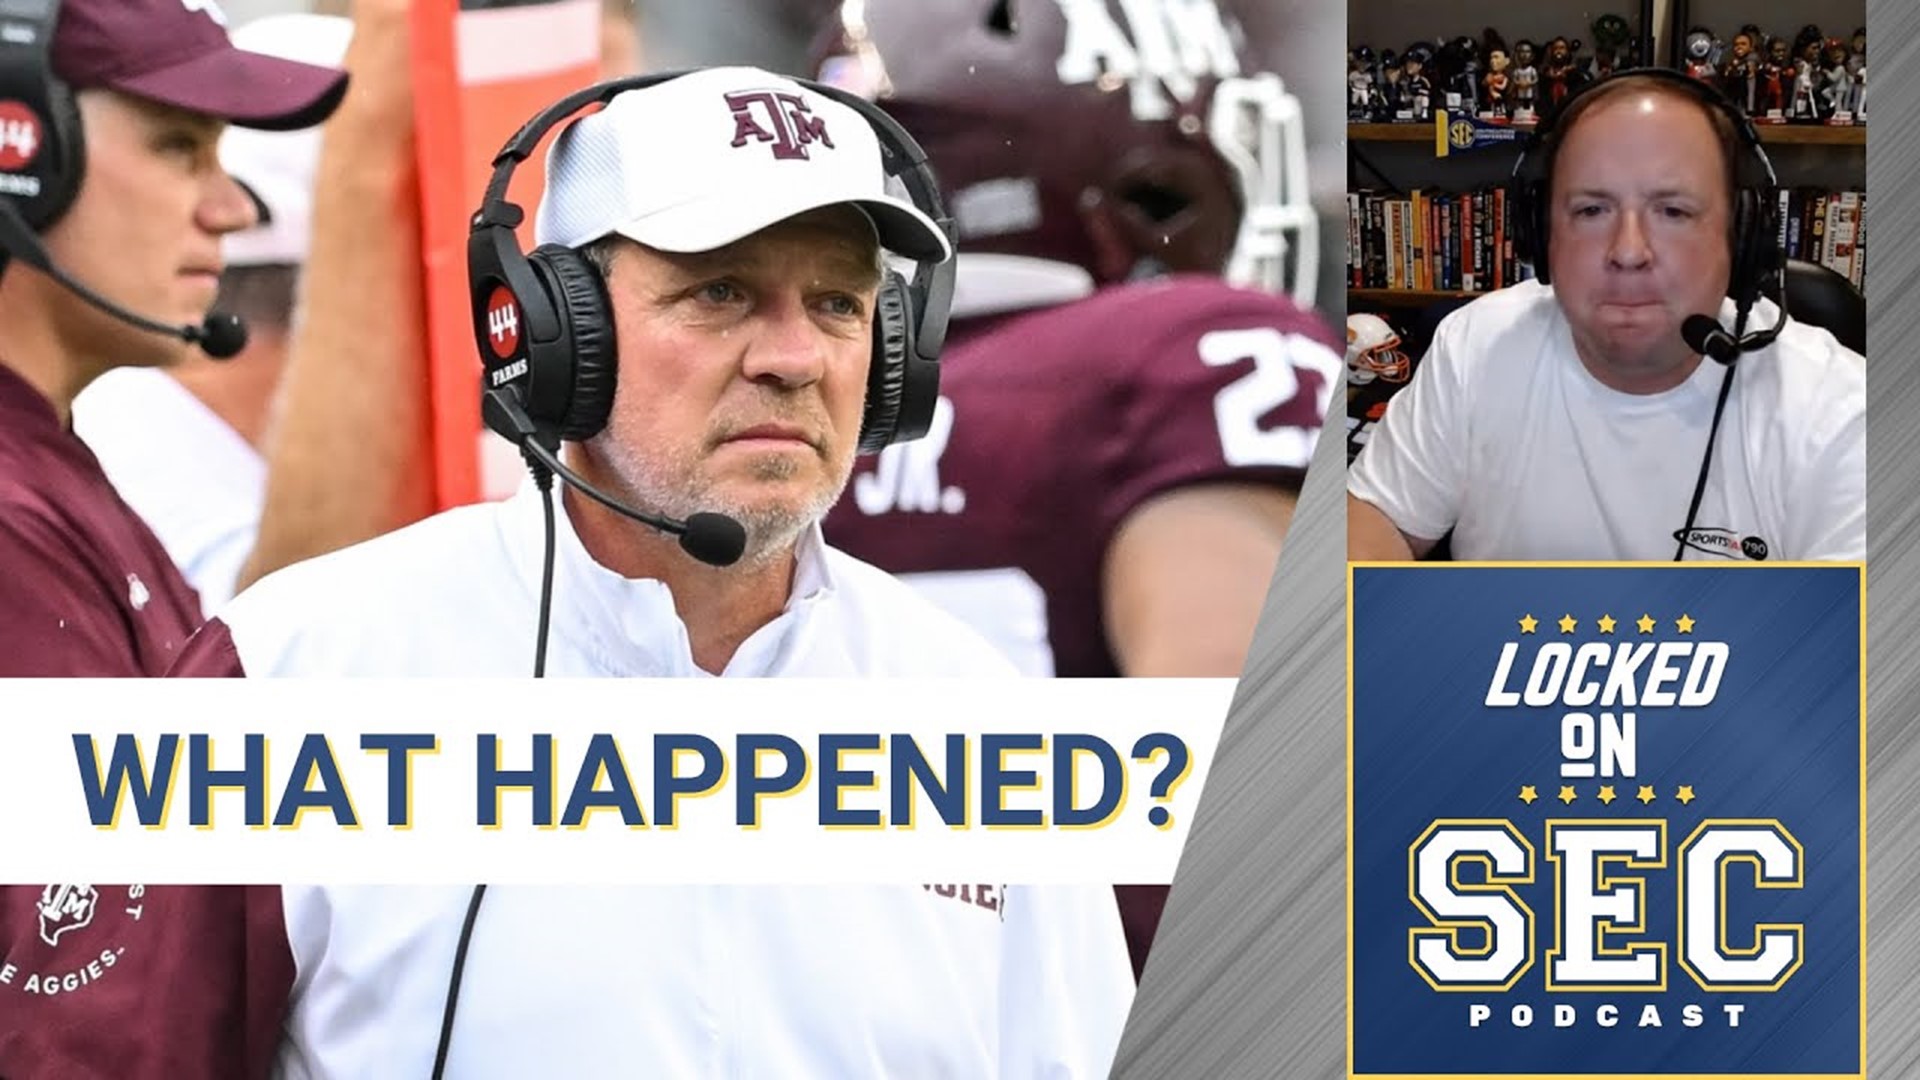 Aggies Lowered Expectations, Kentucky Riding High, News Around The Conference